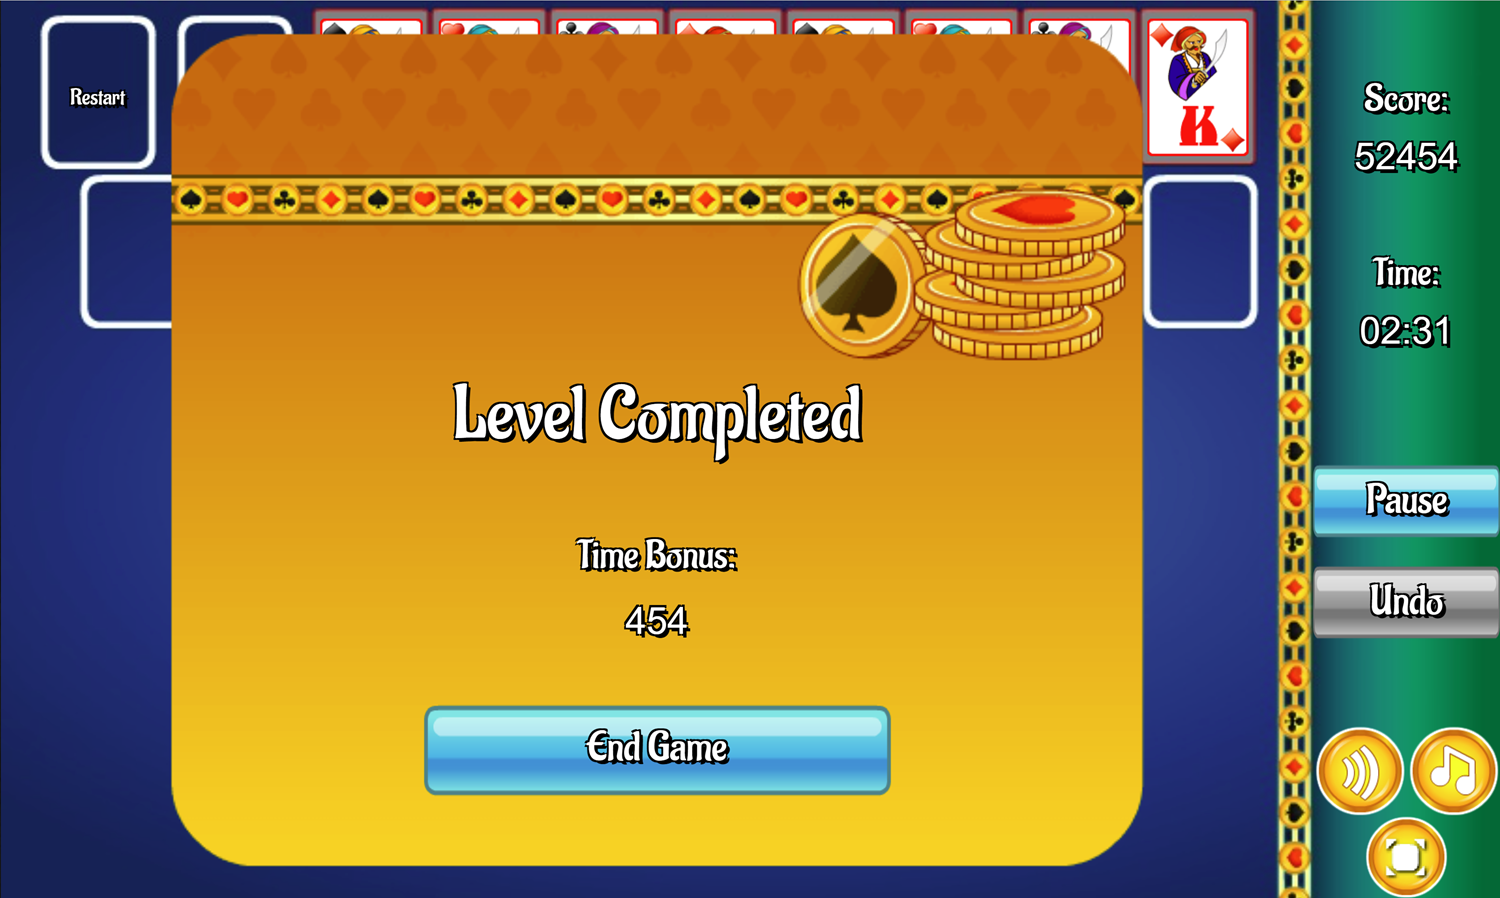 Forty Thieves Solitaire Game Level Completed Screen Screenshot.